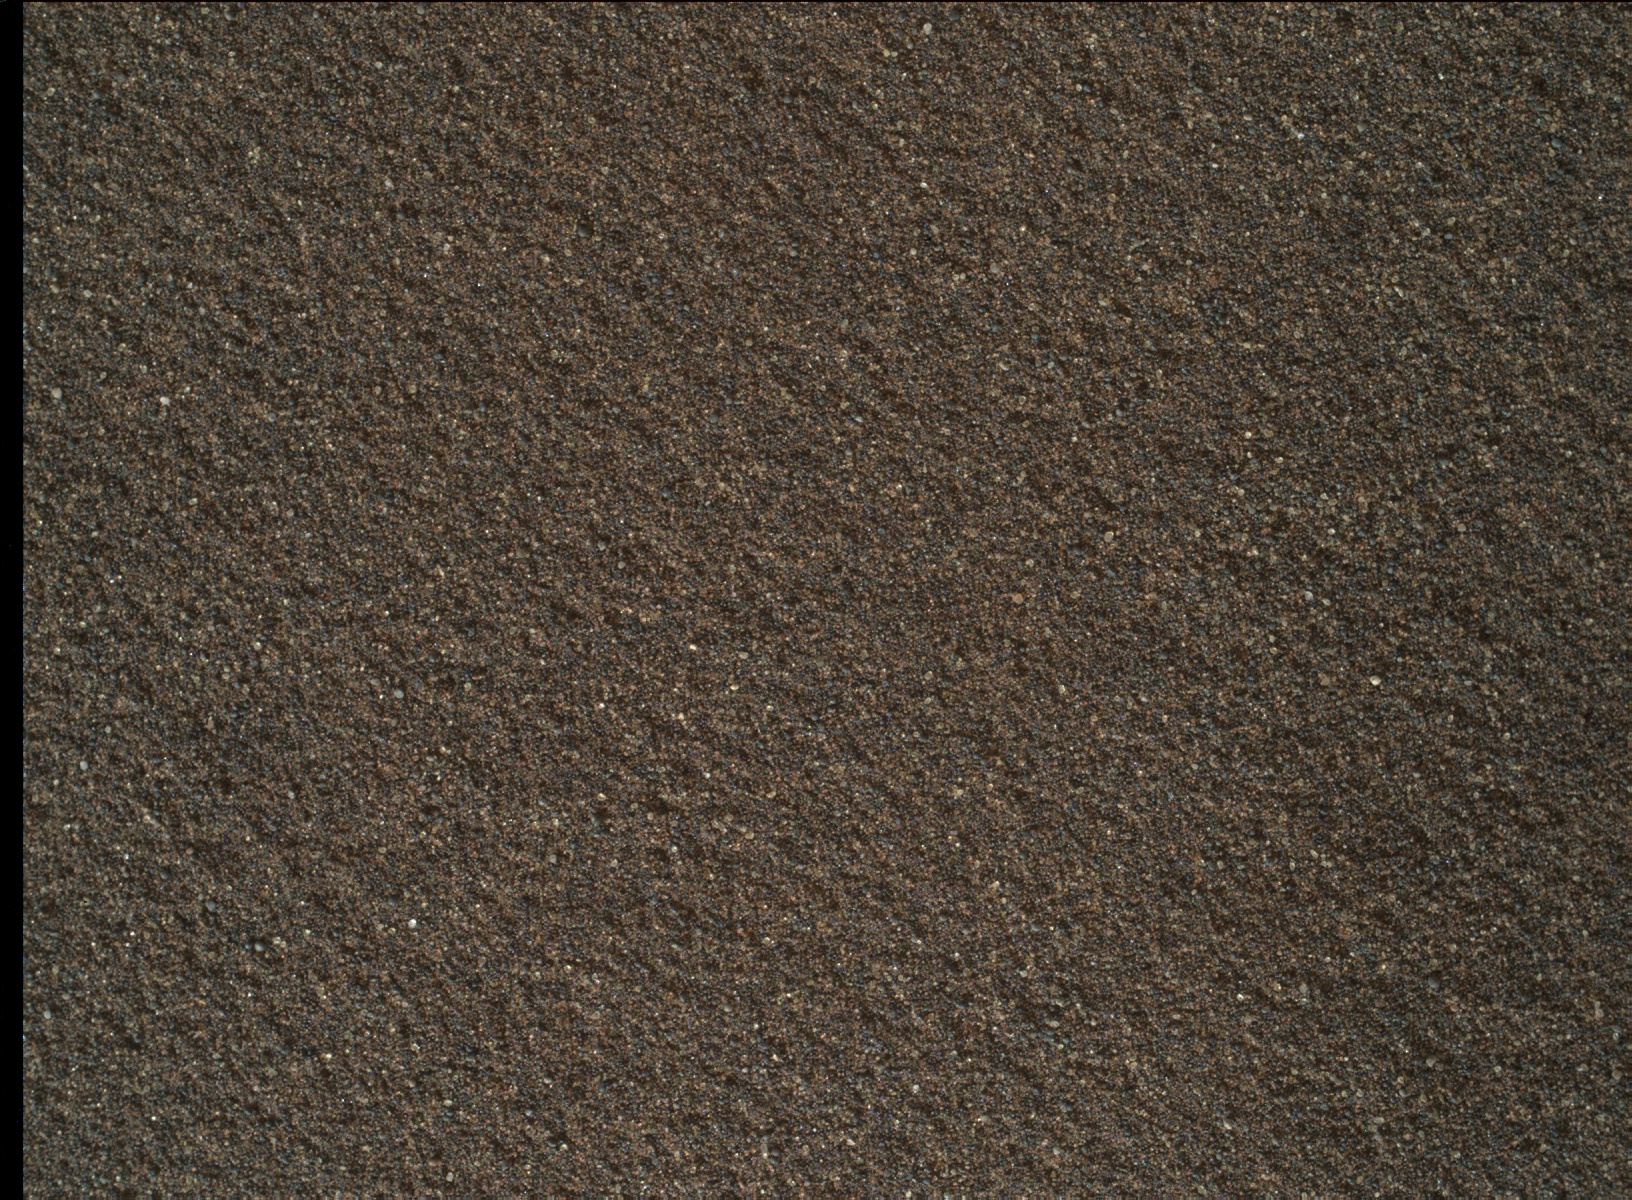 Nasa's Mars rover Curiosity acquired this image using its Mars Hand Lens Imager (MAHLI) on Sol 2025